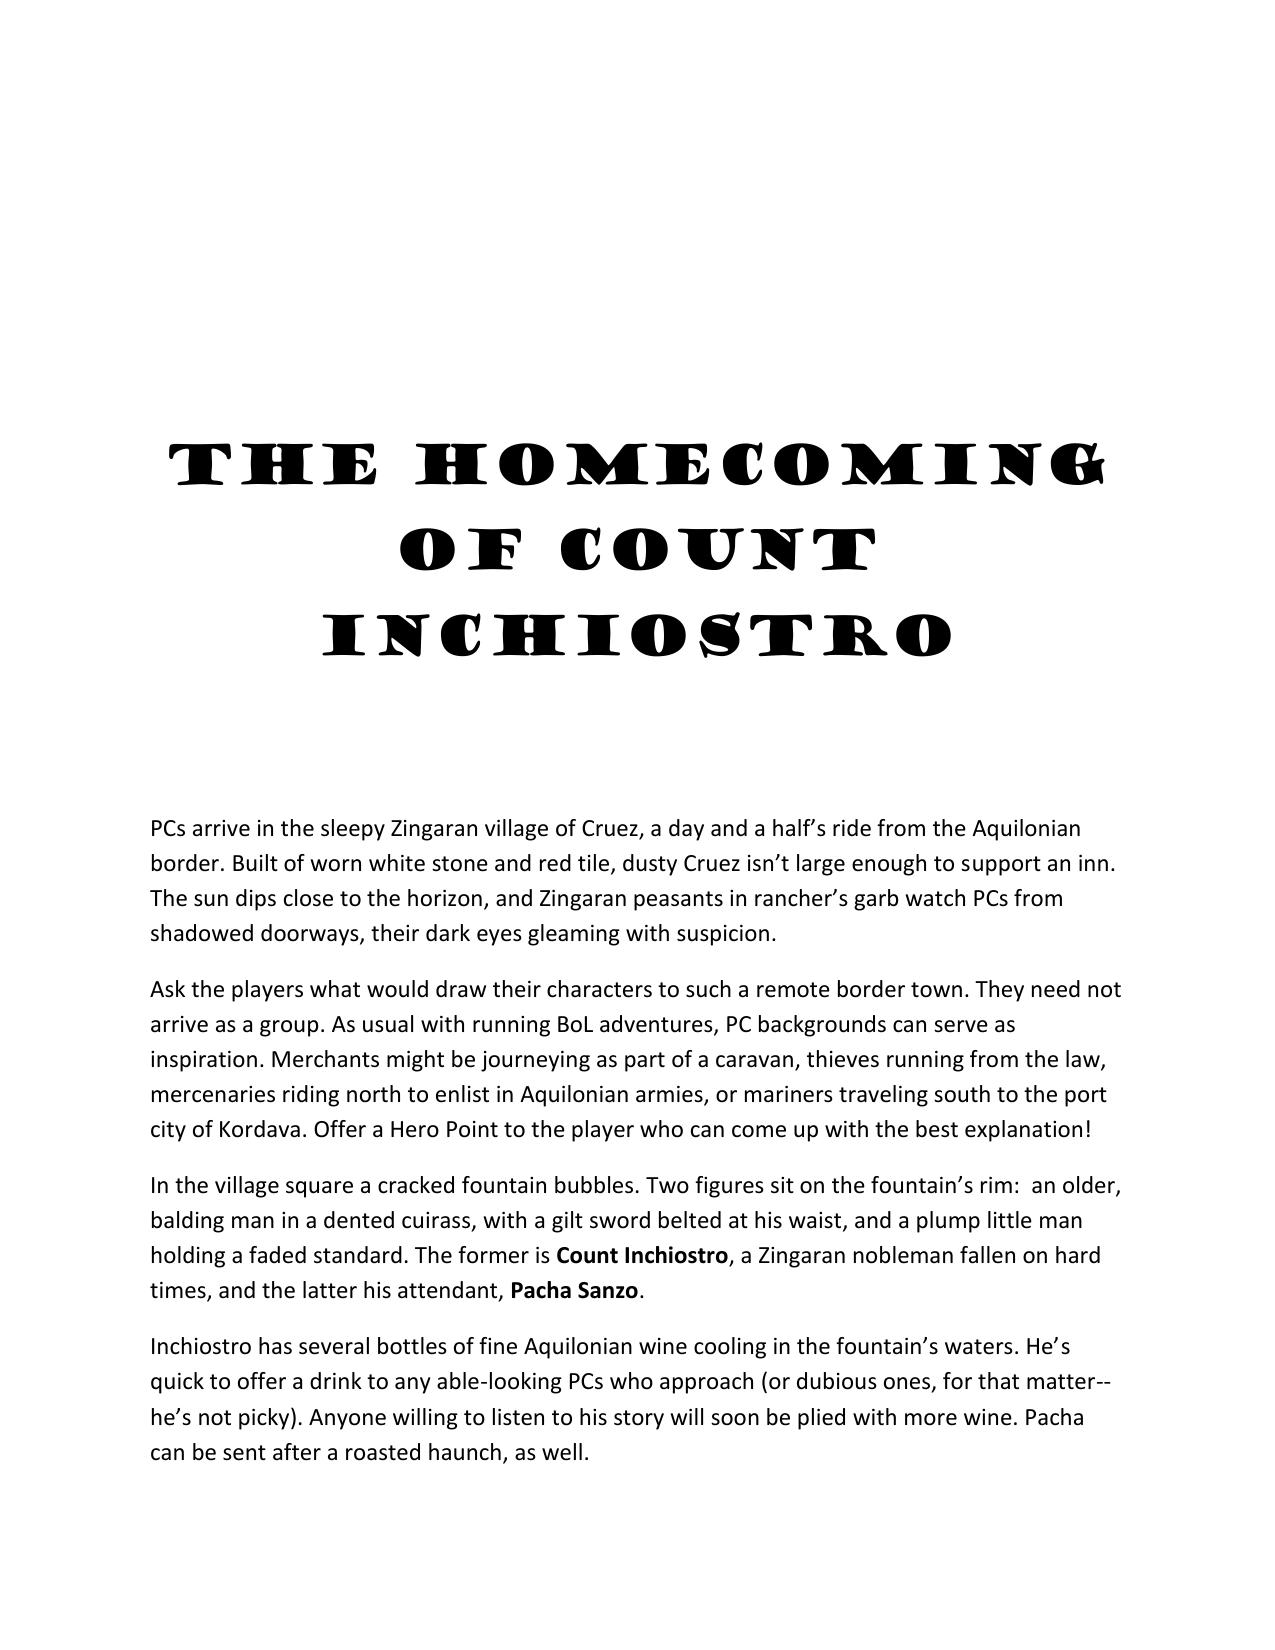 The Homecoming of Count Inchiostro (BoL)